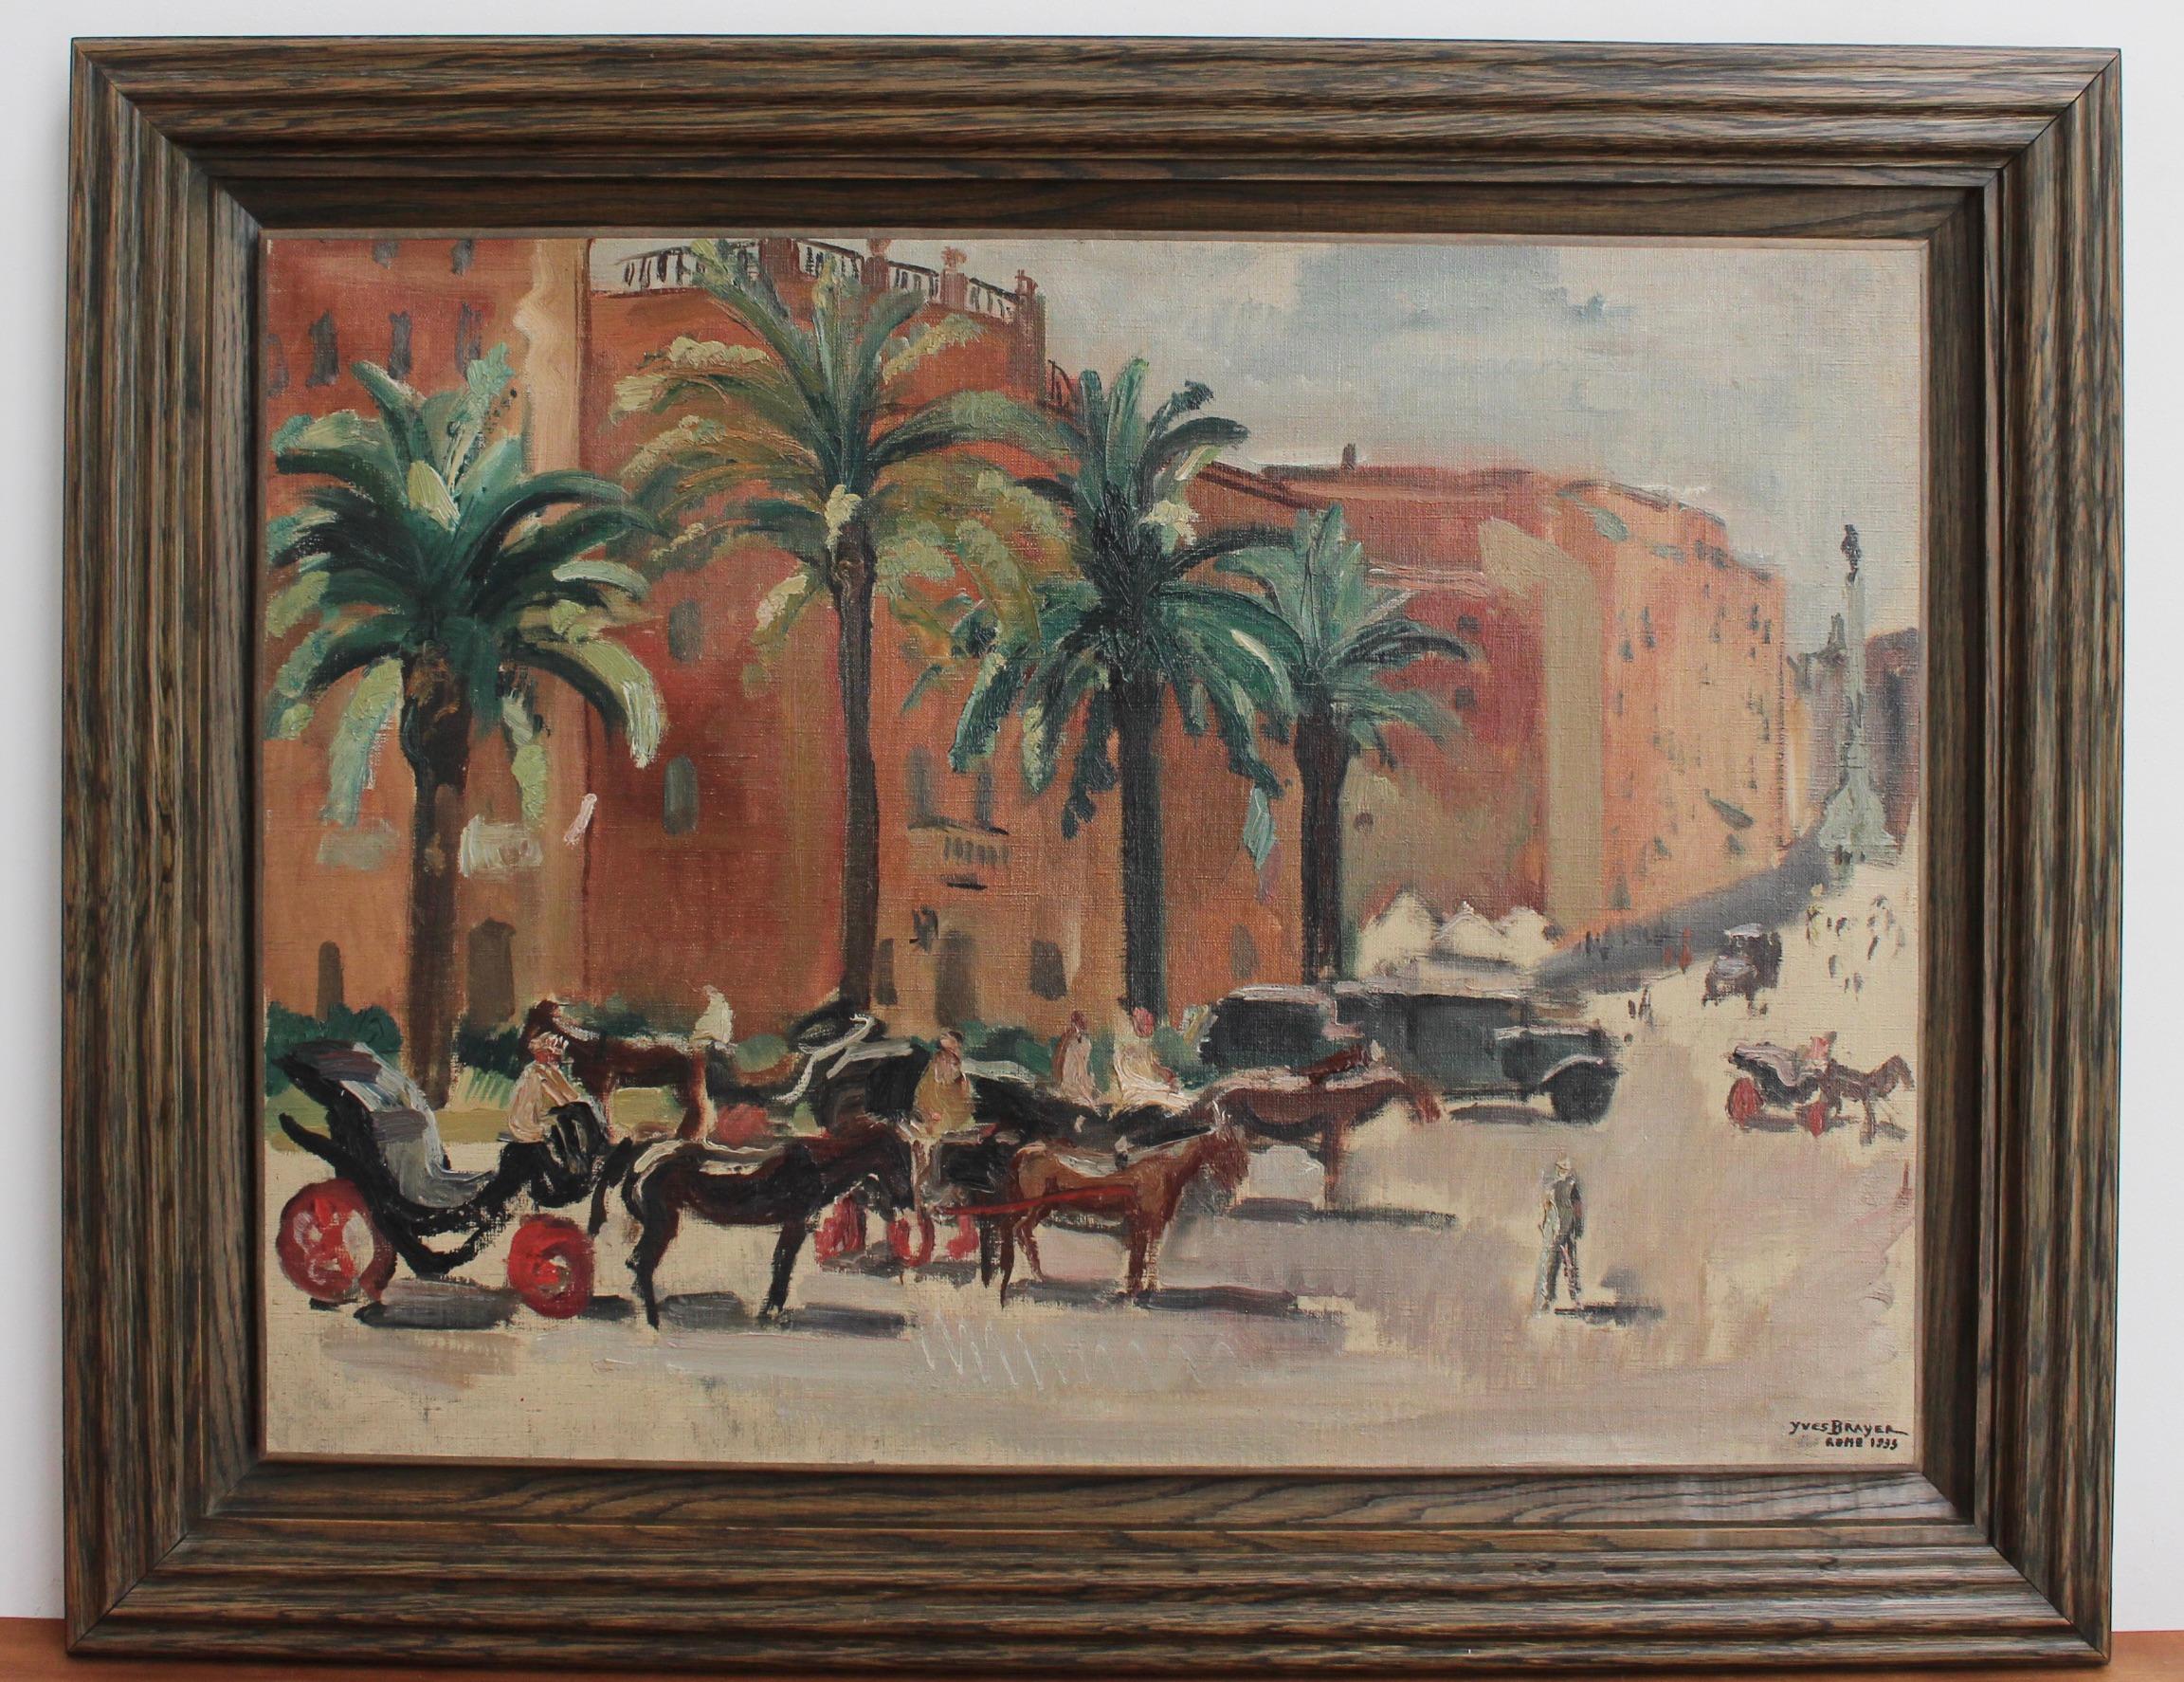 Piazza di Spagna Roma - Painting de Yves Brayer